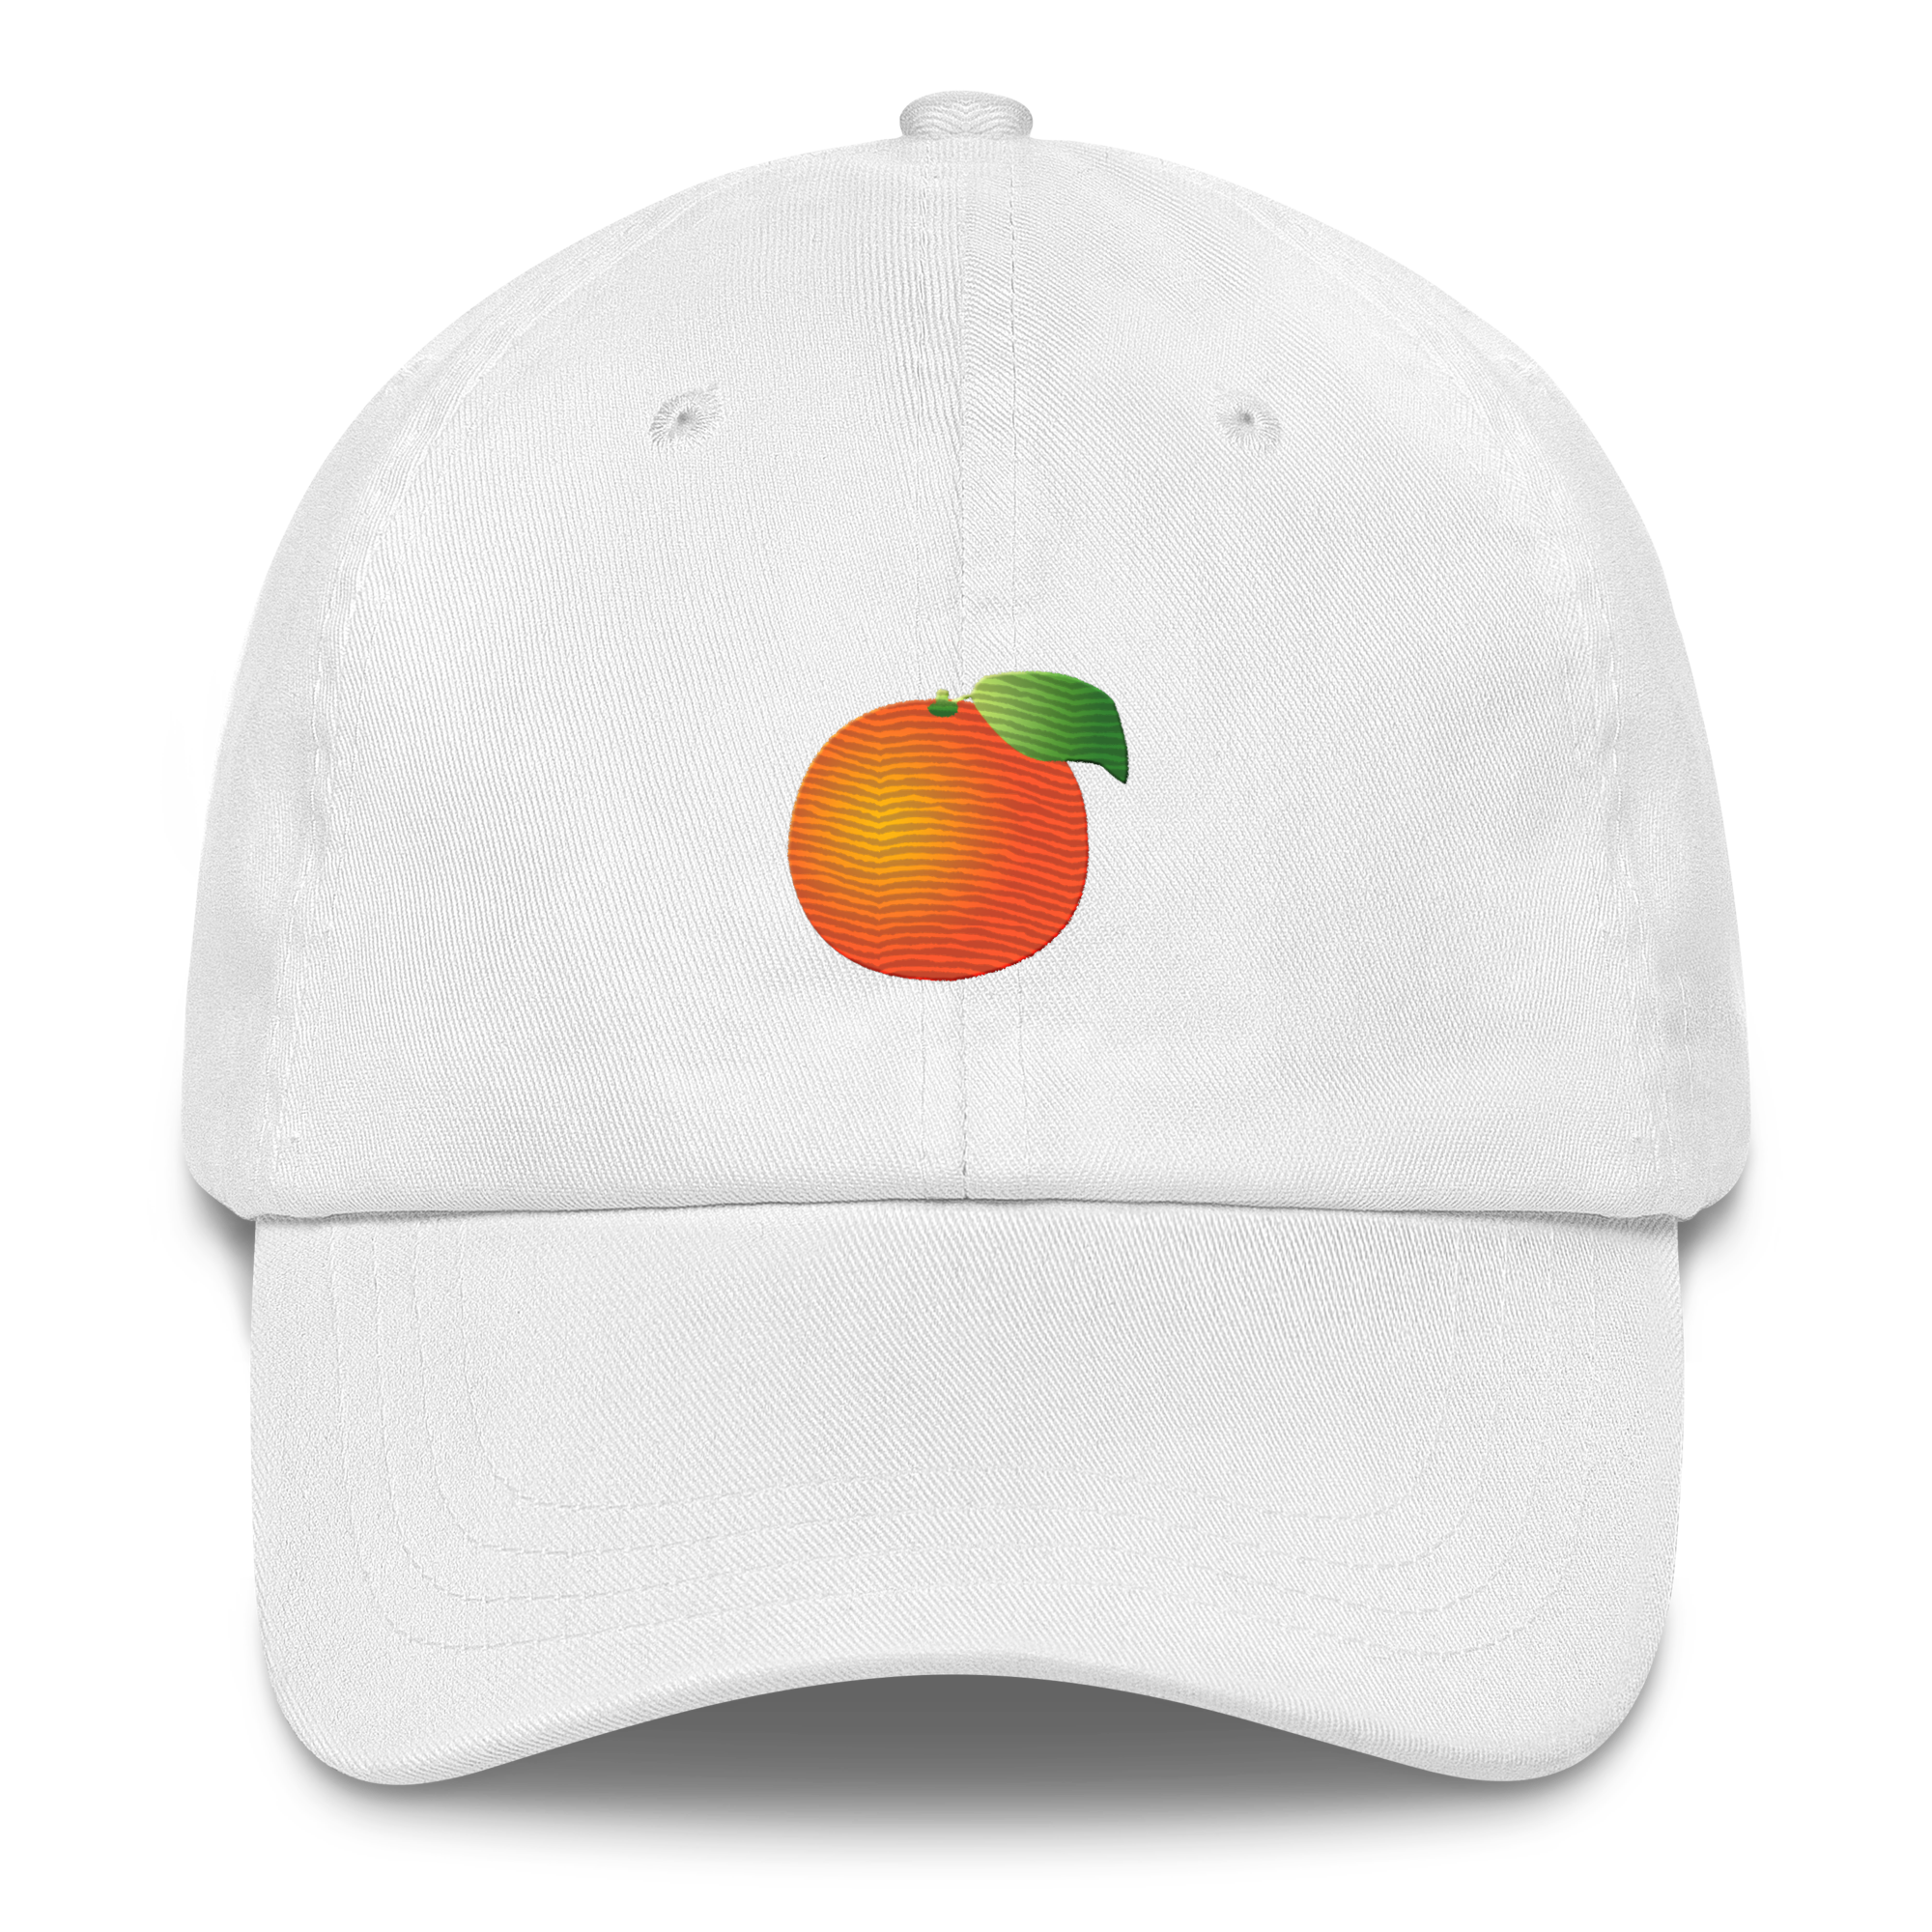 classic-dad-hat-white-front-667af584a432a.png